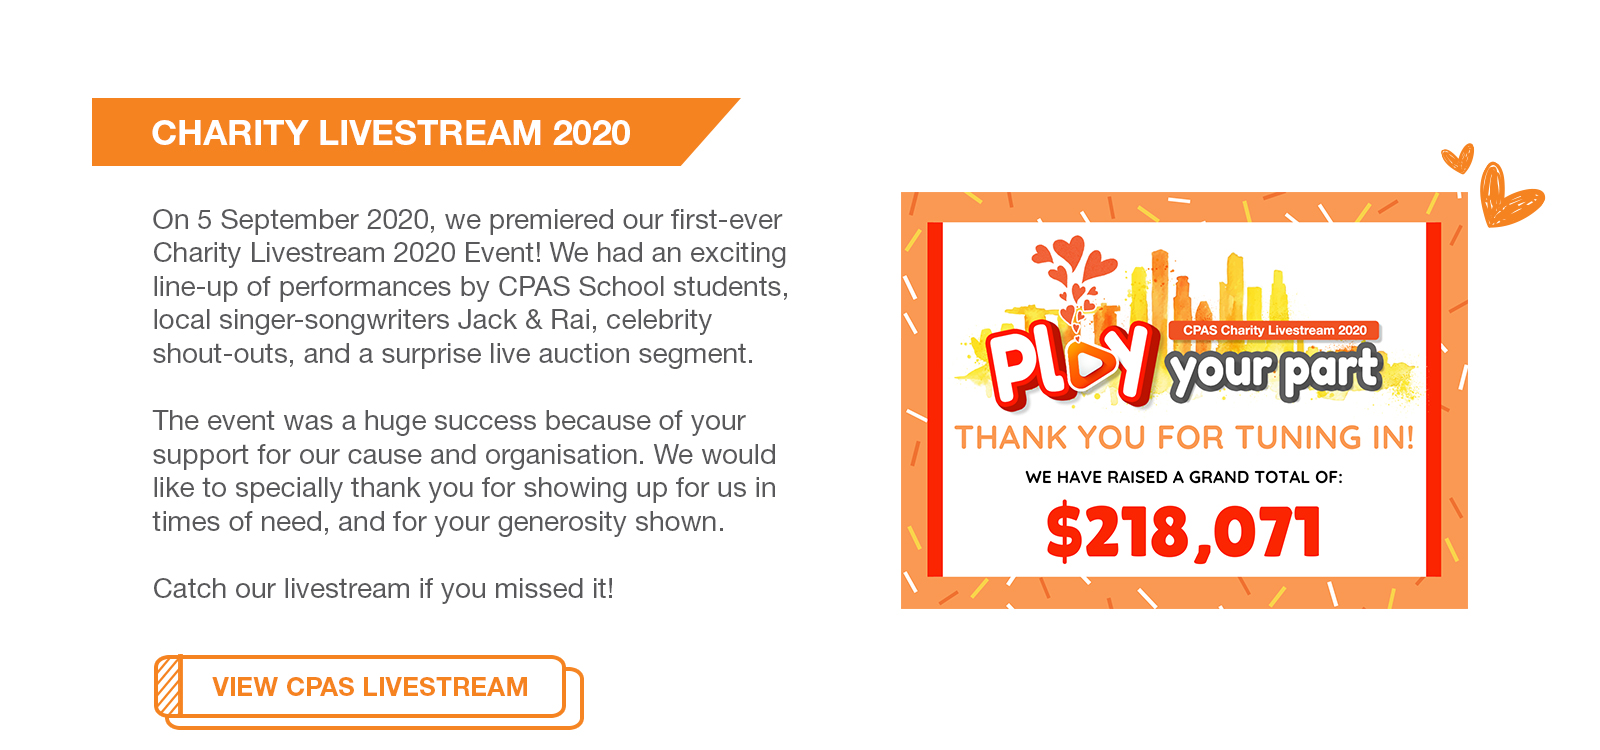 On 5 September 2020 at 6pm, we premiered our first-ever Charity Livestream 2020 Event! We had an exciting line-up of performances by CPAS School students, local singer-songwriters Jack & Rai, celebrity shout-outs, and a surprise live auction segment.

The event was a huge success because of your support for our cause and organisation. We would like to specially thank you for showing up for us in times of need, and for your generosity shown.

Catch our livestream if you missed it!
